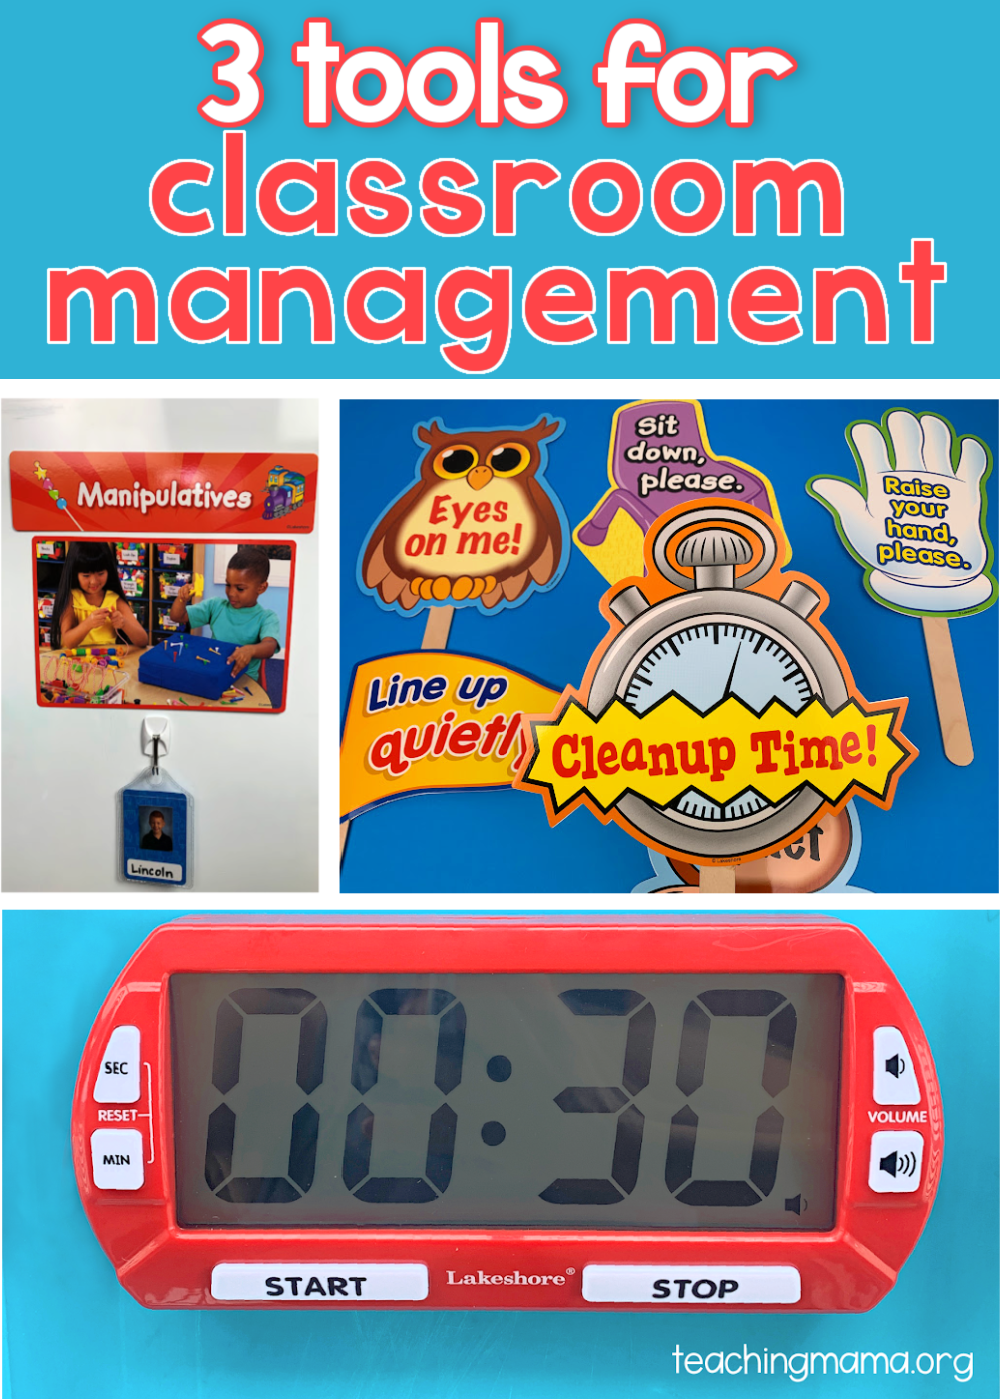 3 tools for classroom management